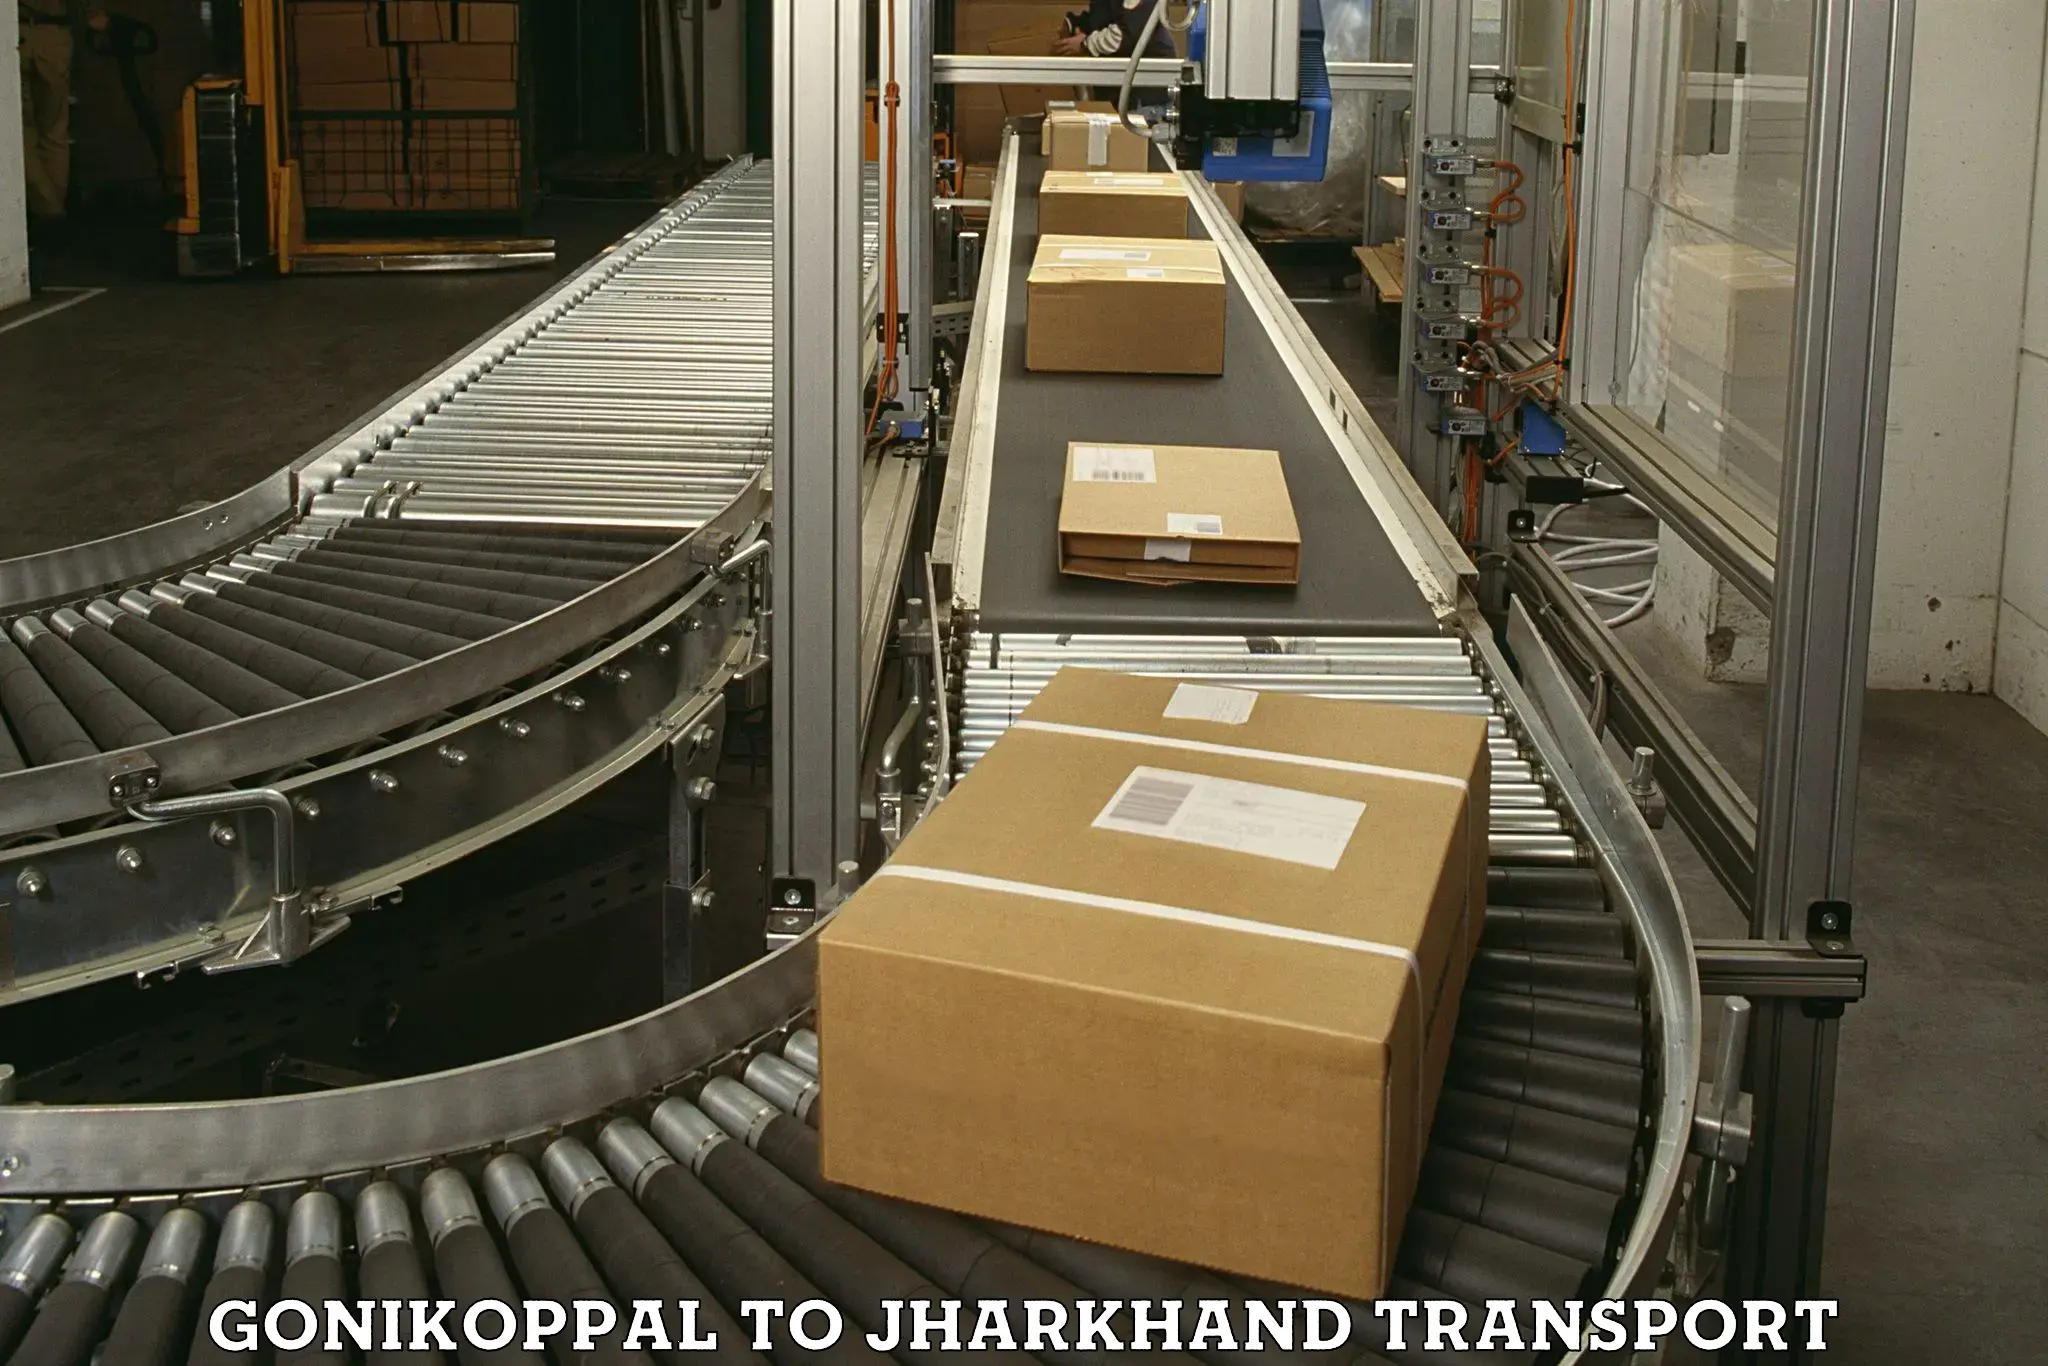 Shipping partner Gonikoppal to Chandil